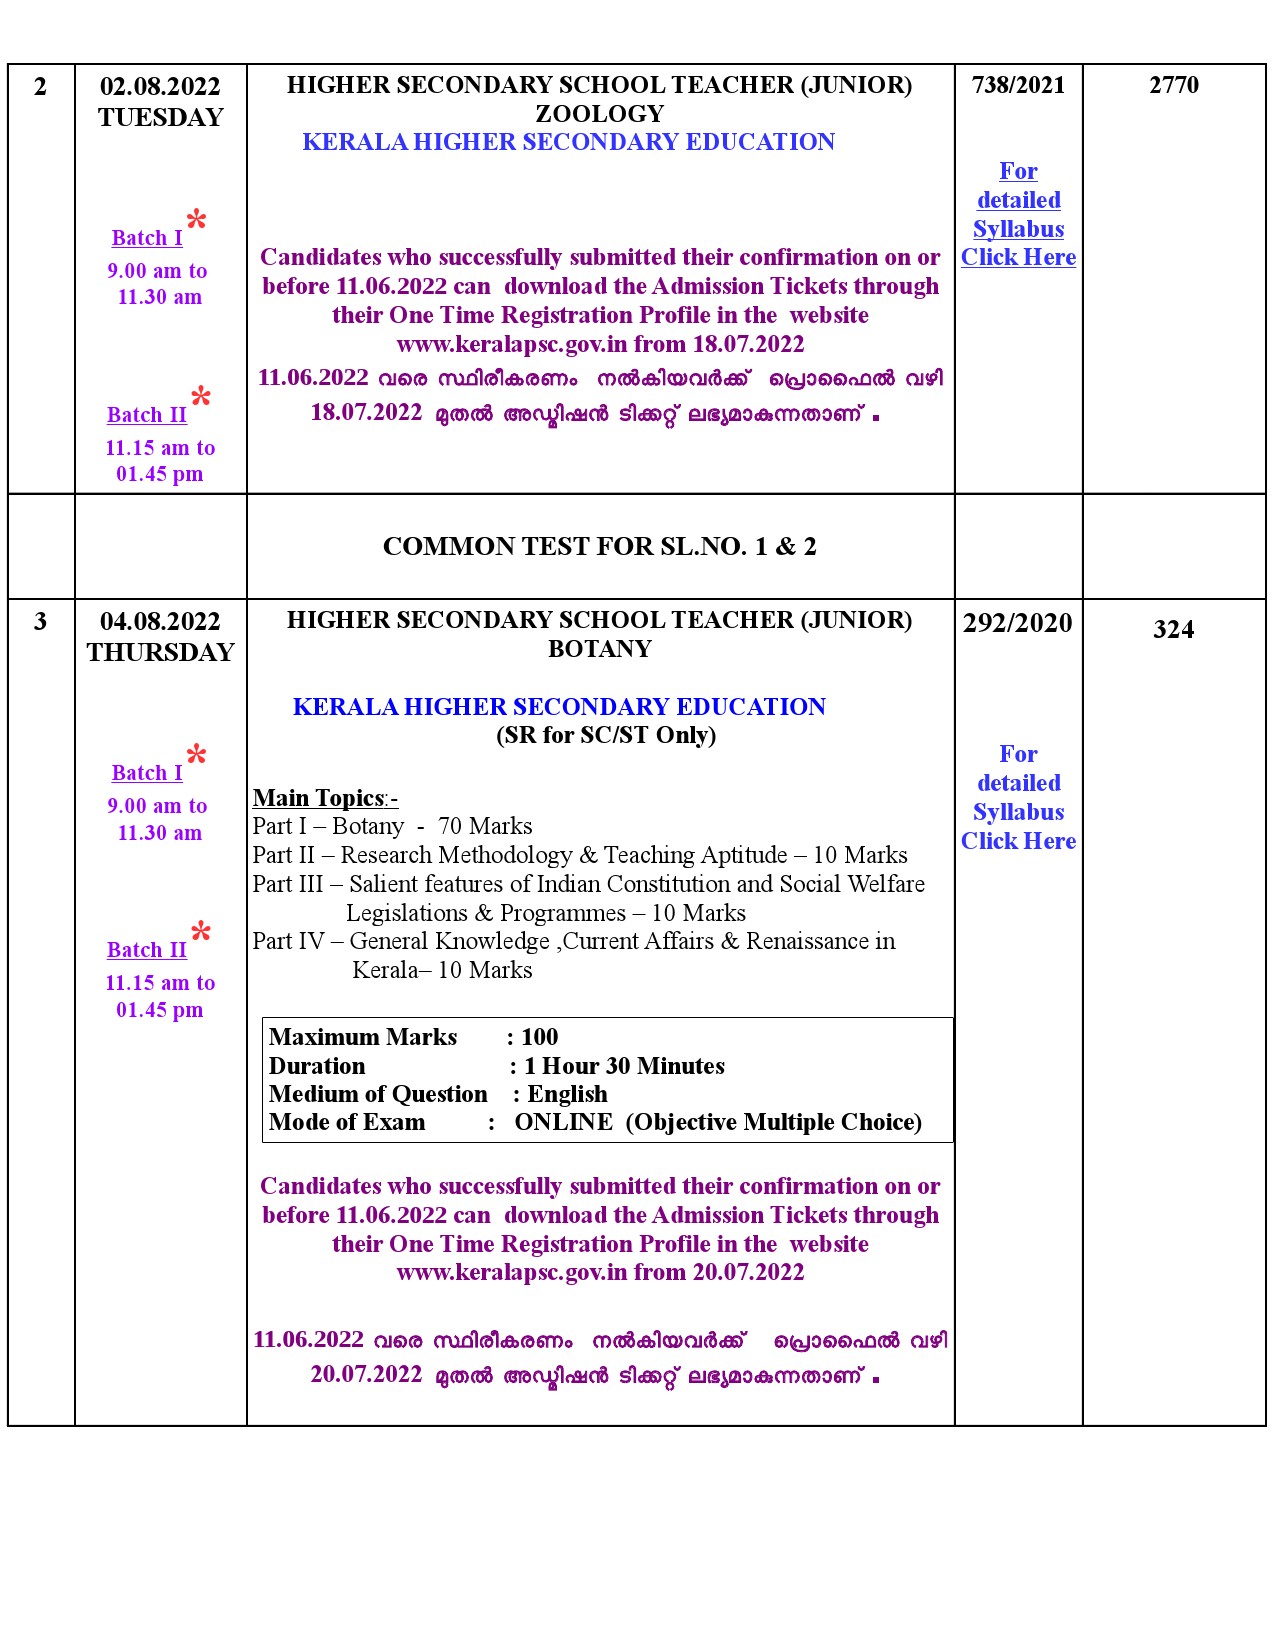 Examination Programme For The Month Of August 2022 - Notification Image 2